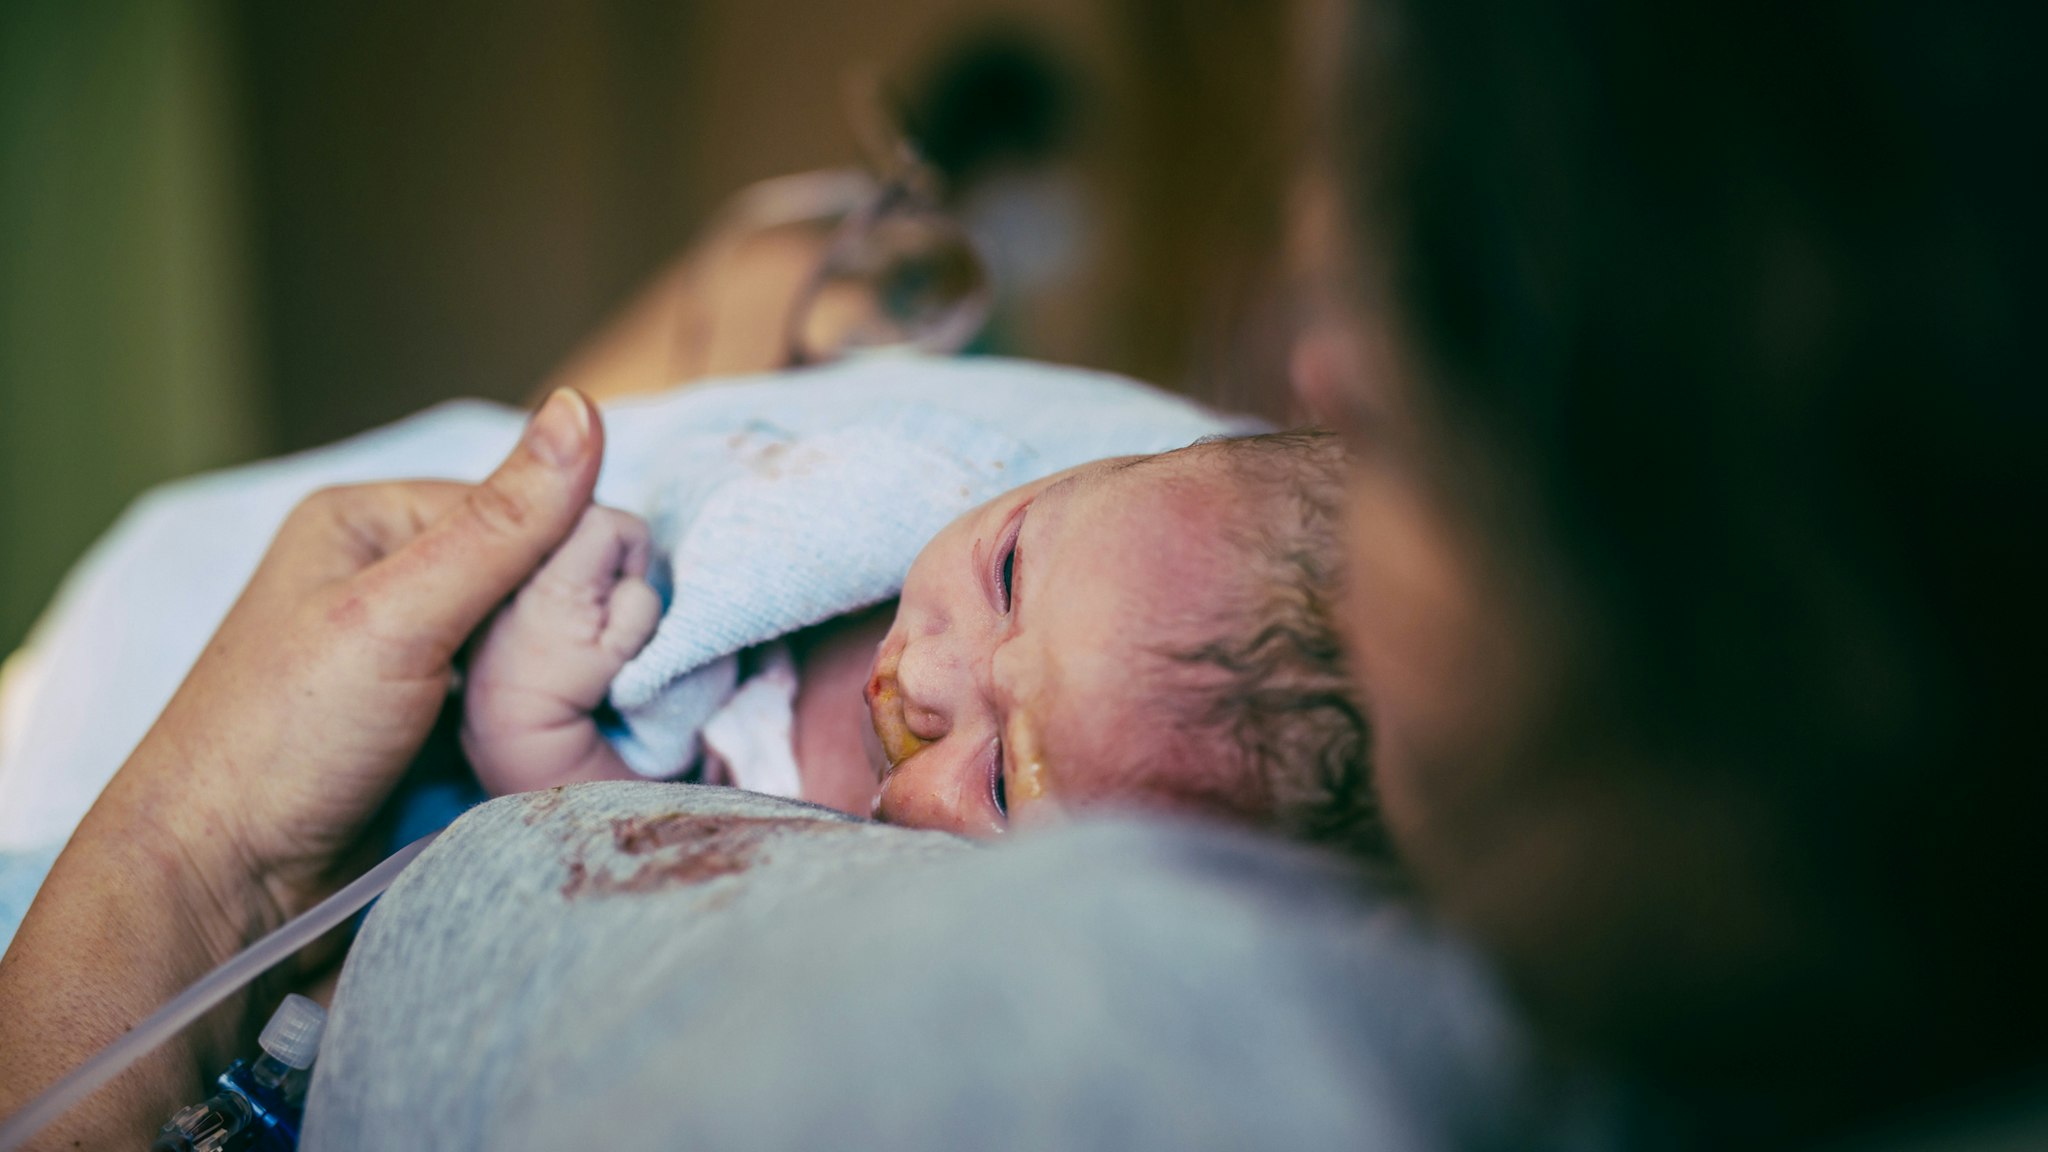 Woman holding her newborn after birth in hospital. - stock photo